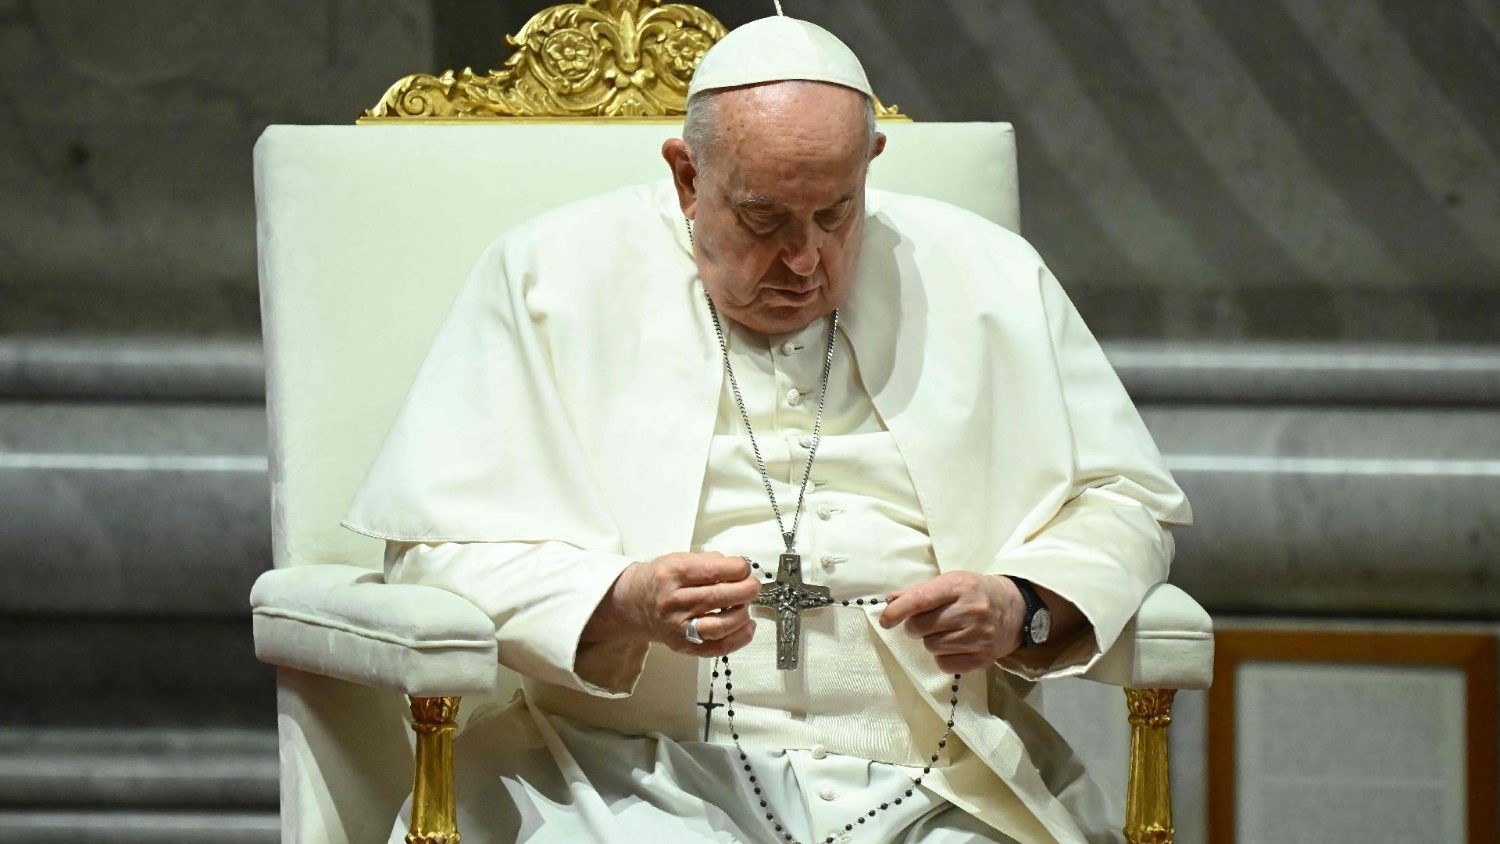 Pope Urges Praying the Rosary for Intercession of Our Lady in World Wars